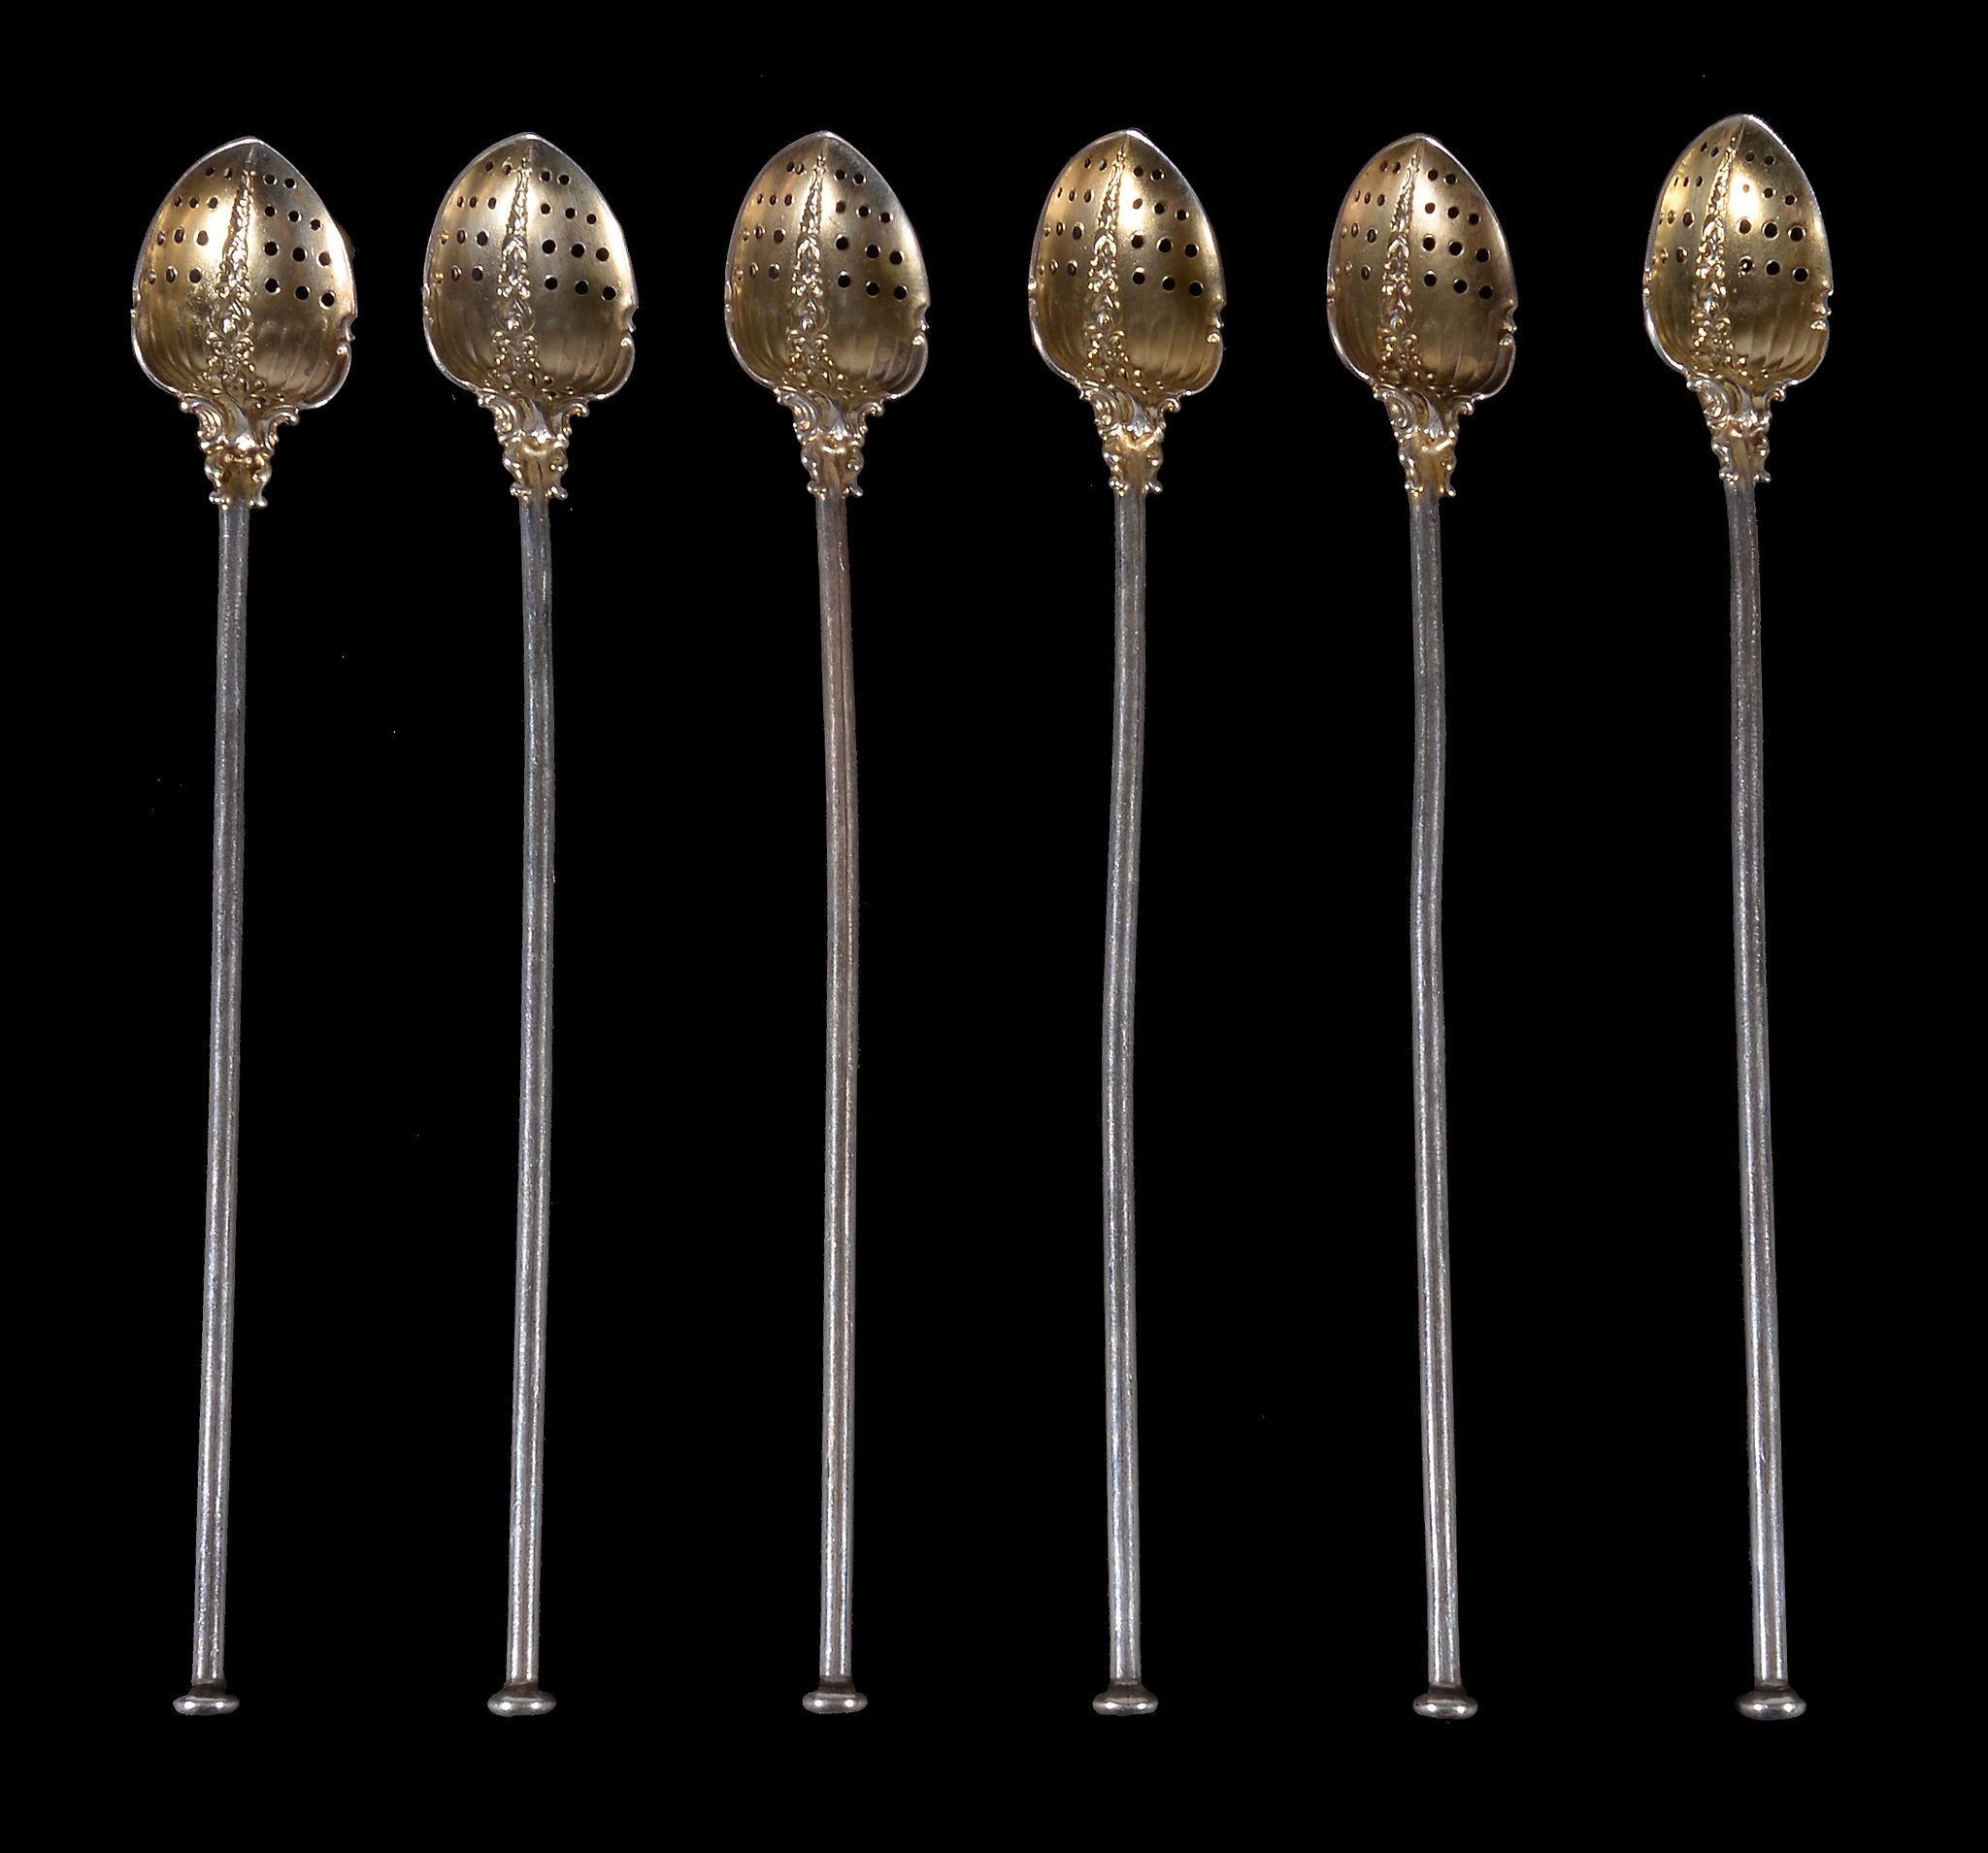 A set of six American silver coloured drinking straws or bombillas by Gorham, date code for 1900,